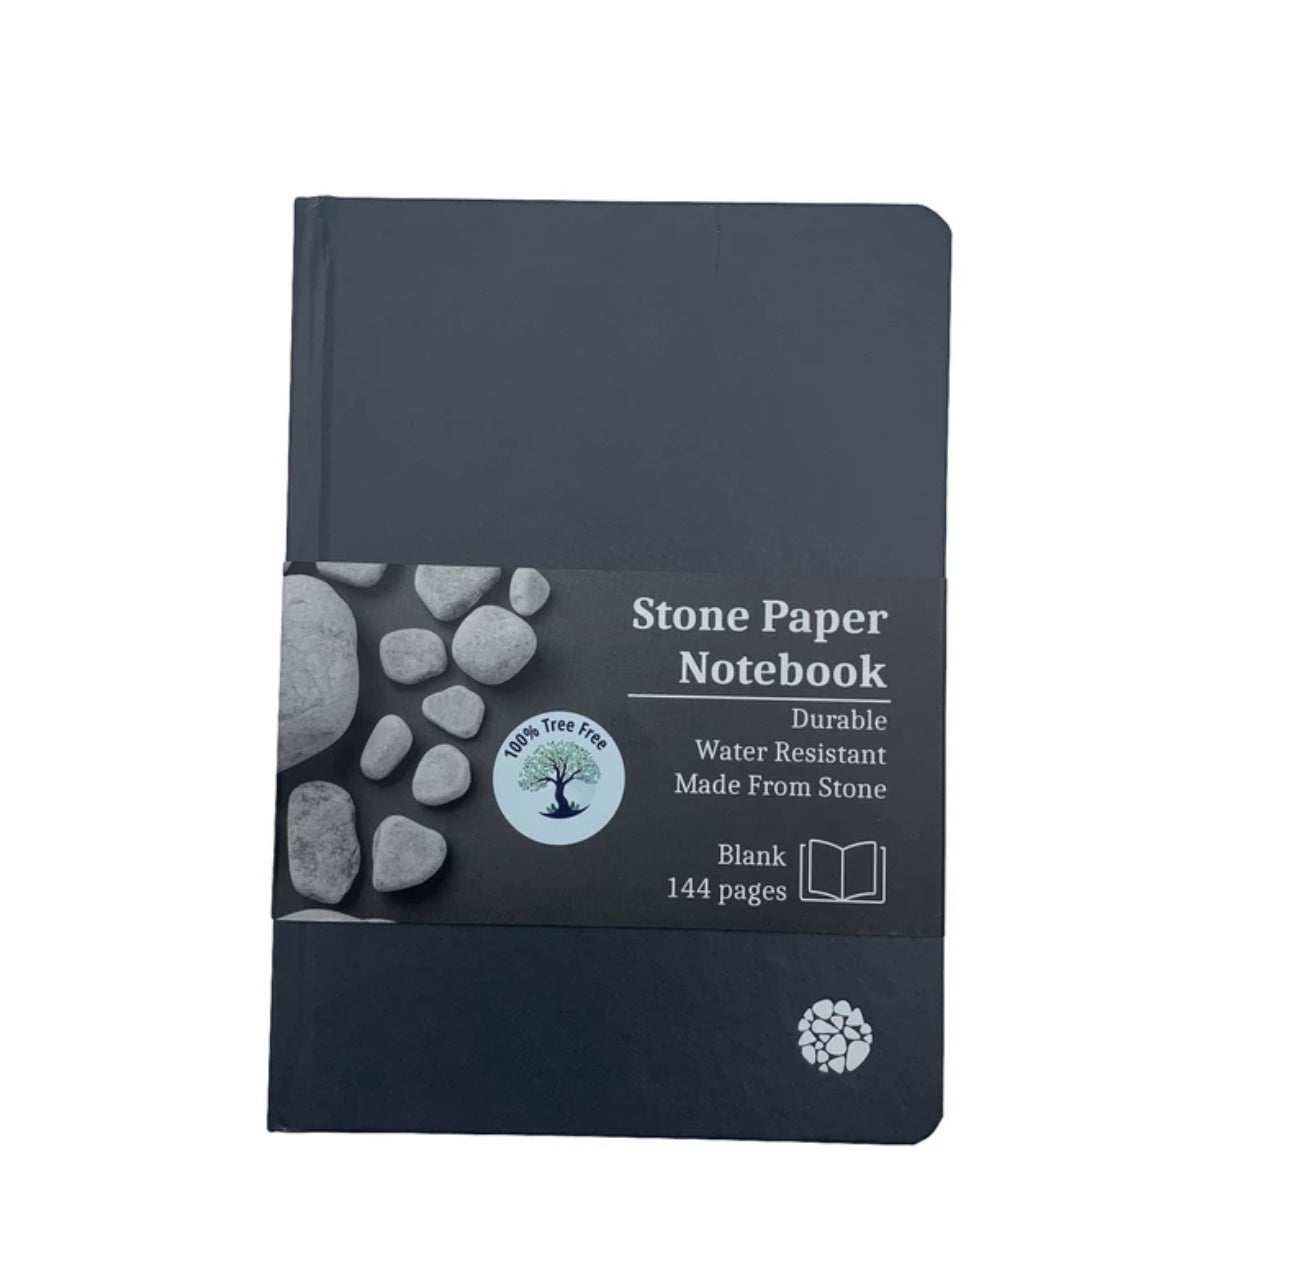 Stone Paper Notebooks - Made from Recycled Stone